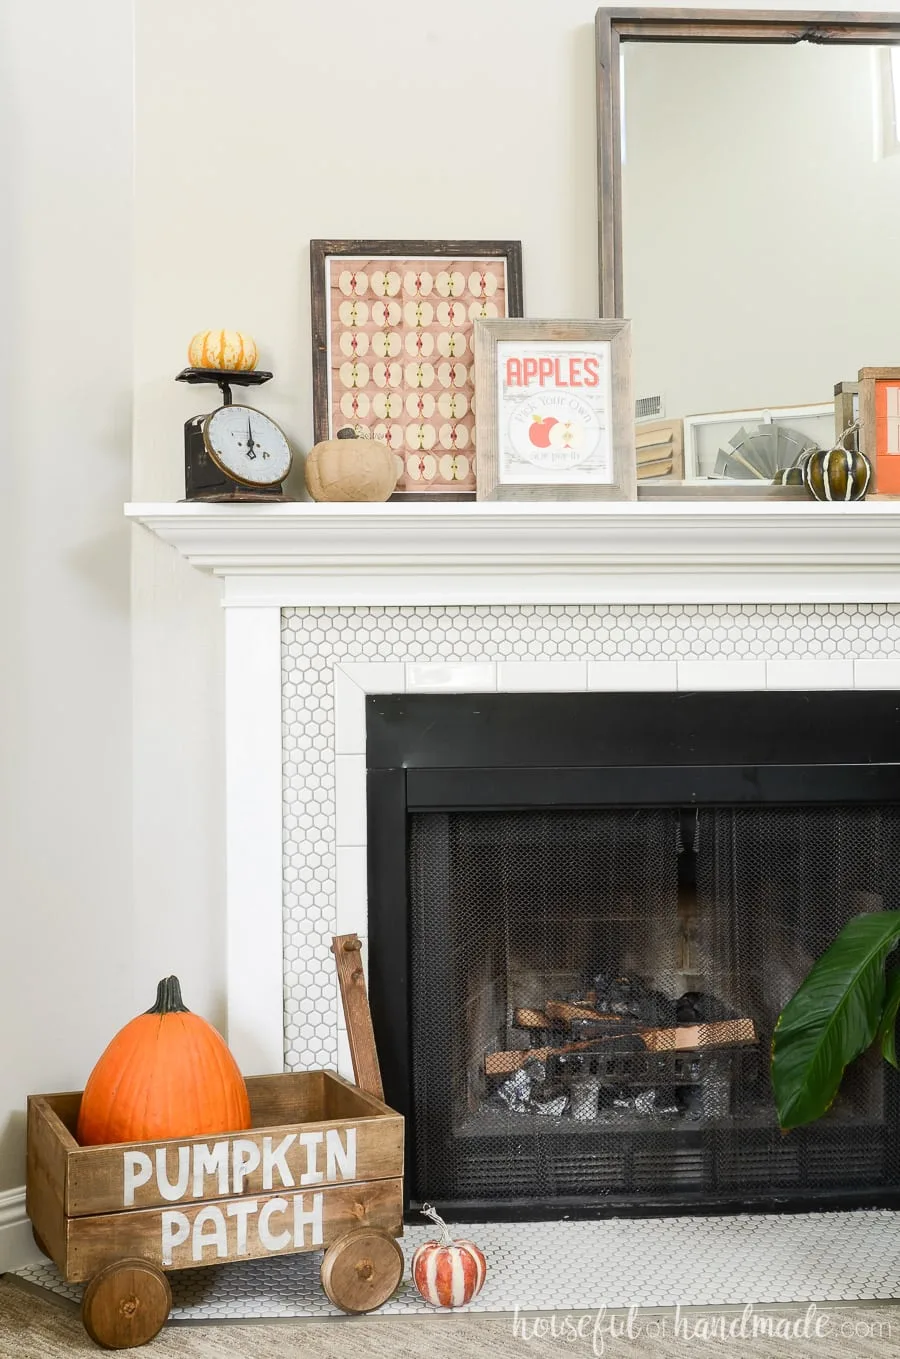 View of the entire fall mantel with the decorative wood wagon holding the pumpkin on the hearth.